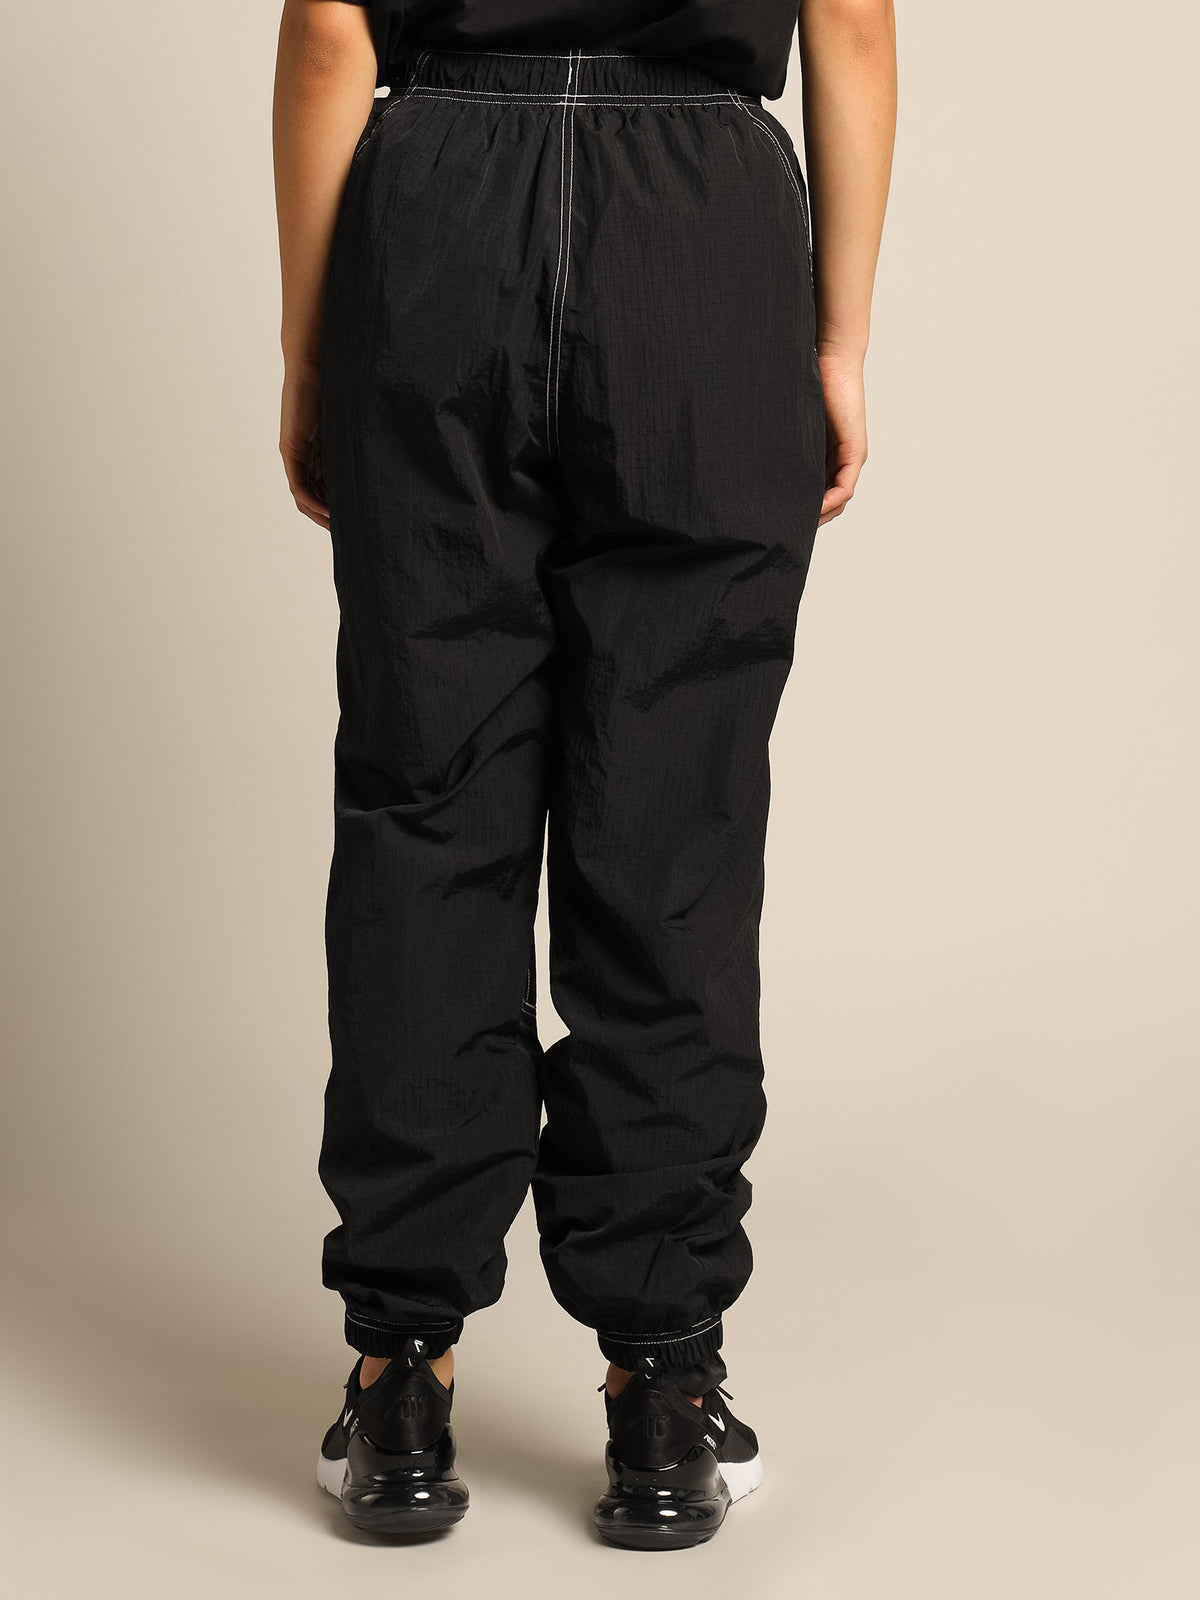 NSW Repel Swoosh Track Pants in Black &amp; White